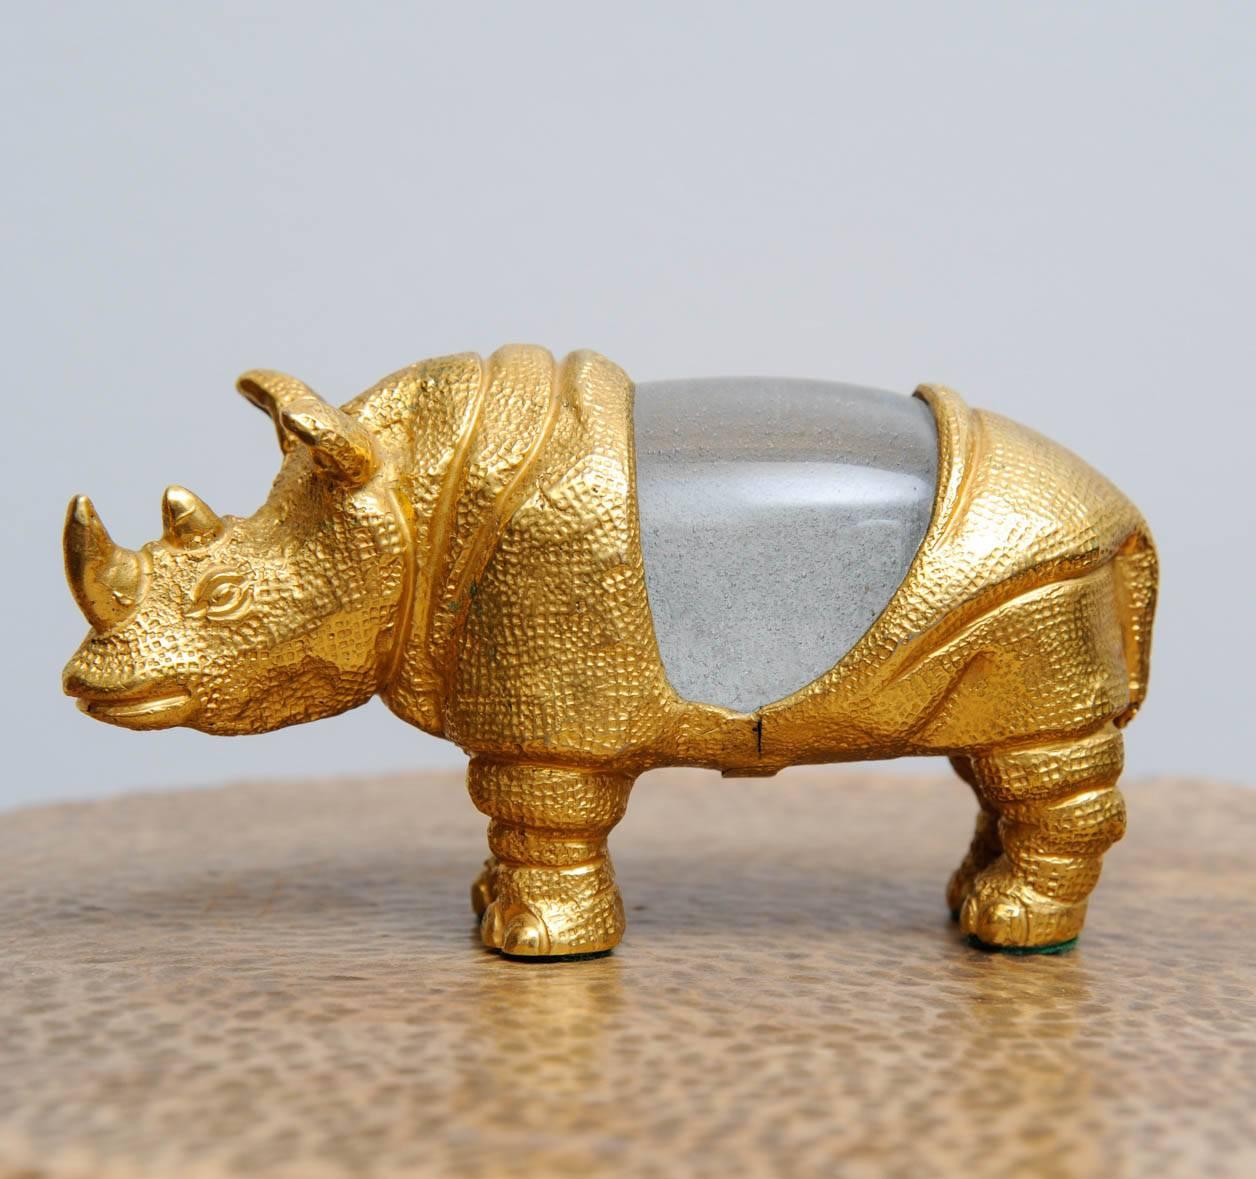 Small rhinoceros in bronze with Barovier glass by Crespi.
Signed
Please note a little crack in the glass (see photos).